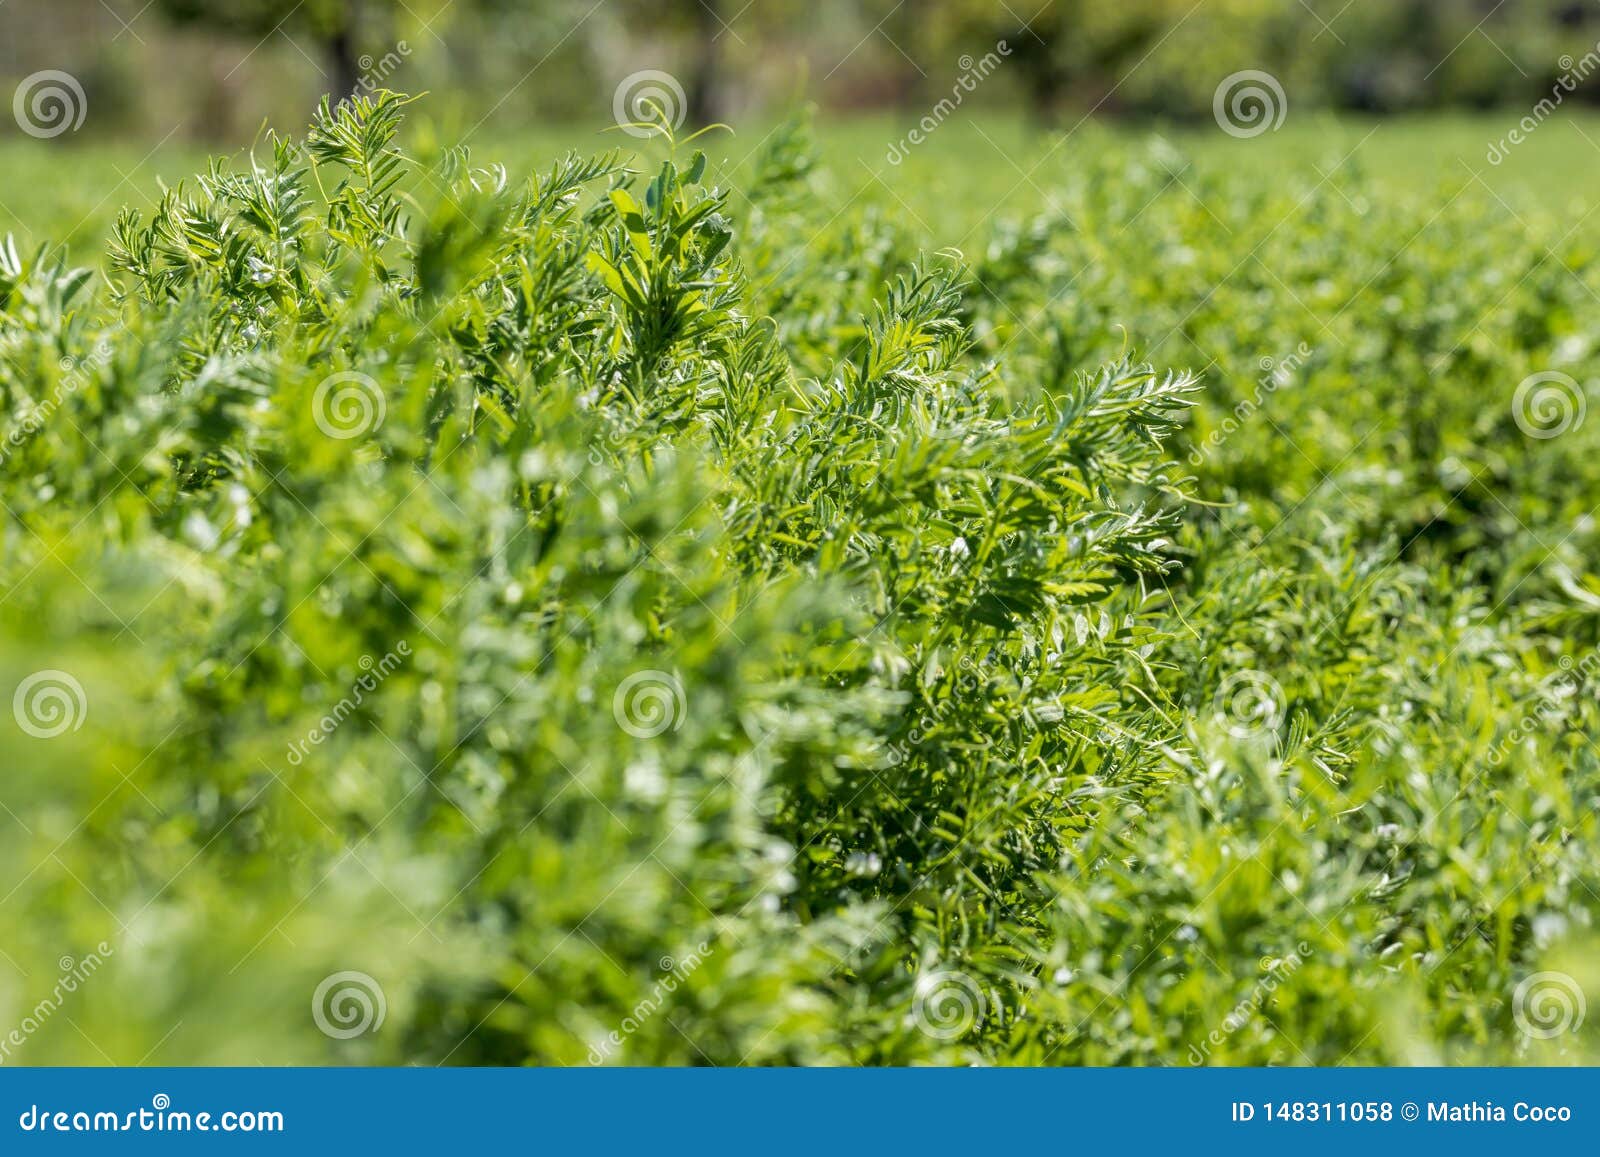 close-up of lentil plants in a field